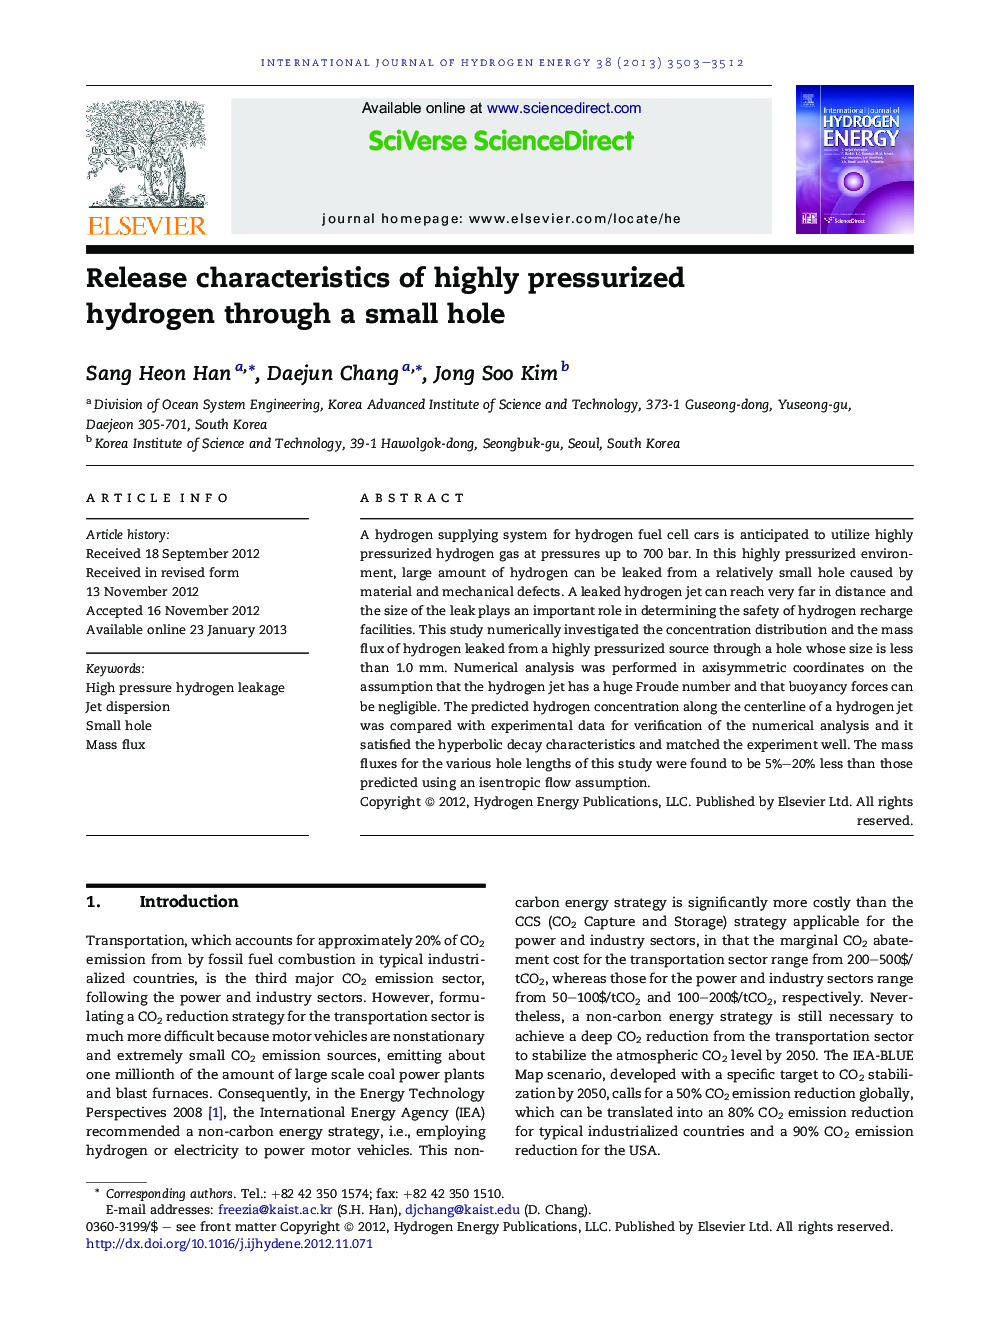 Release characteristics of highly pressurized hydrogen through a small hole